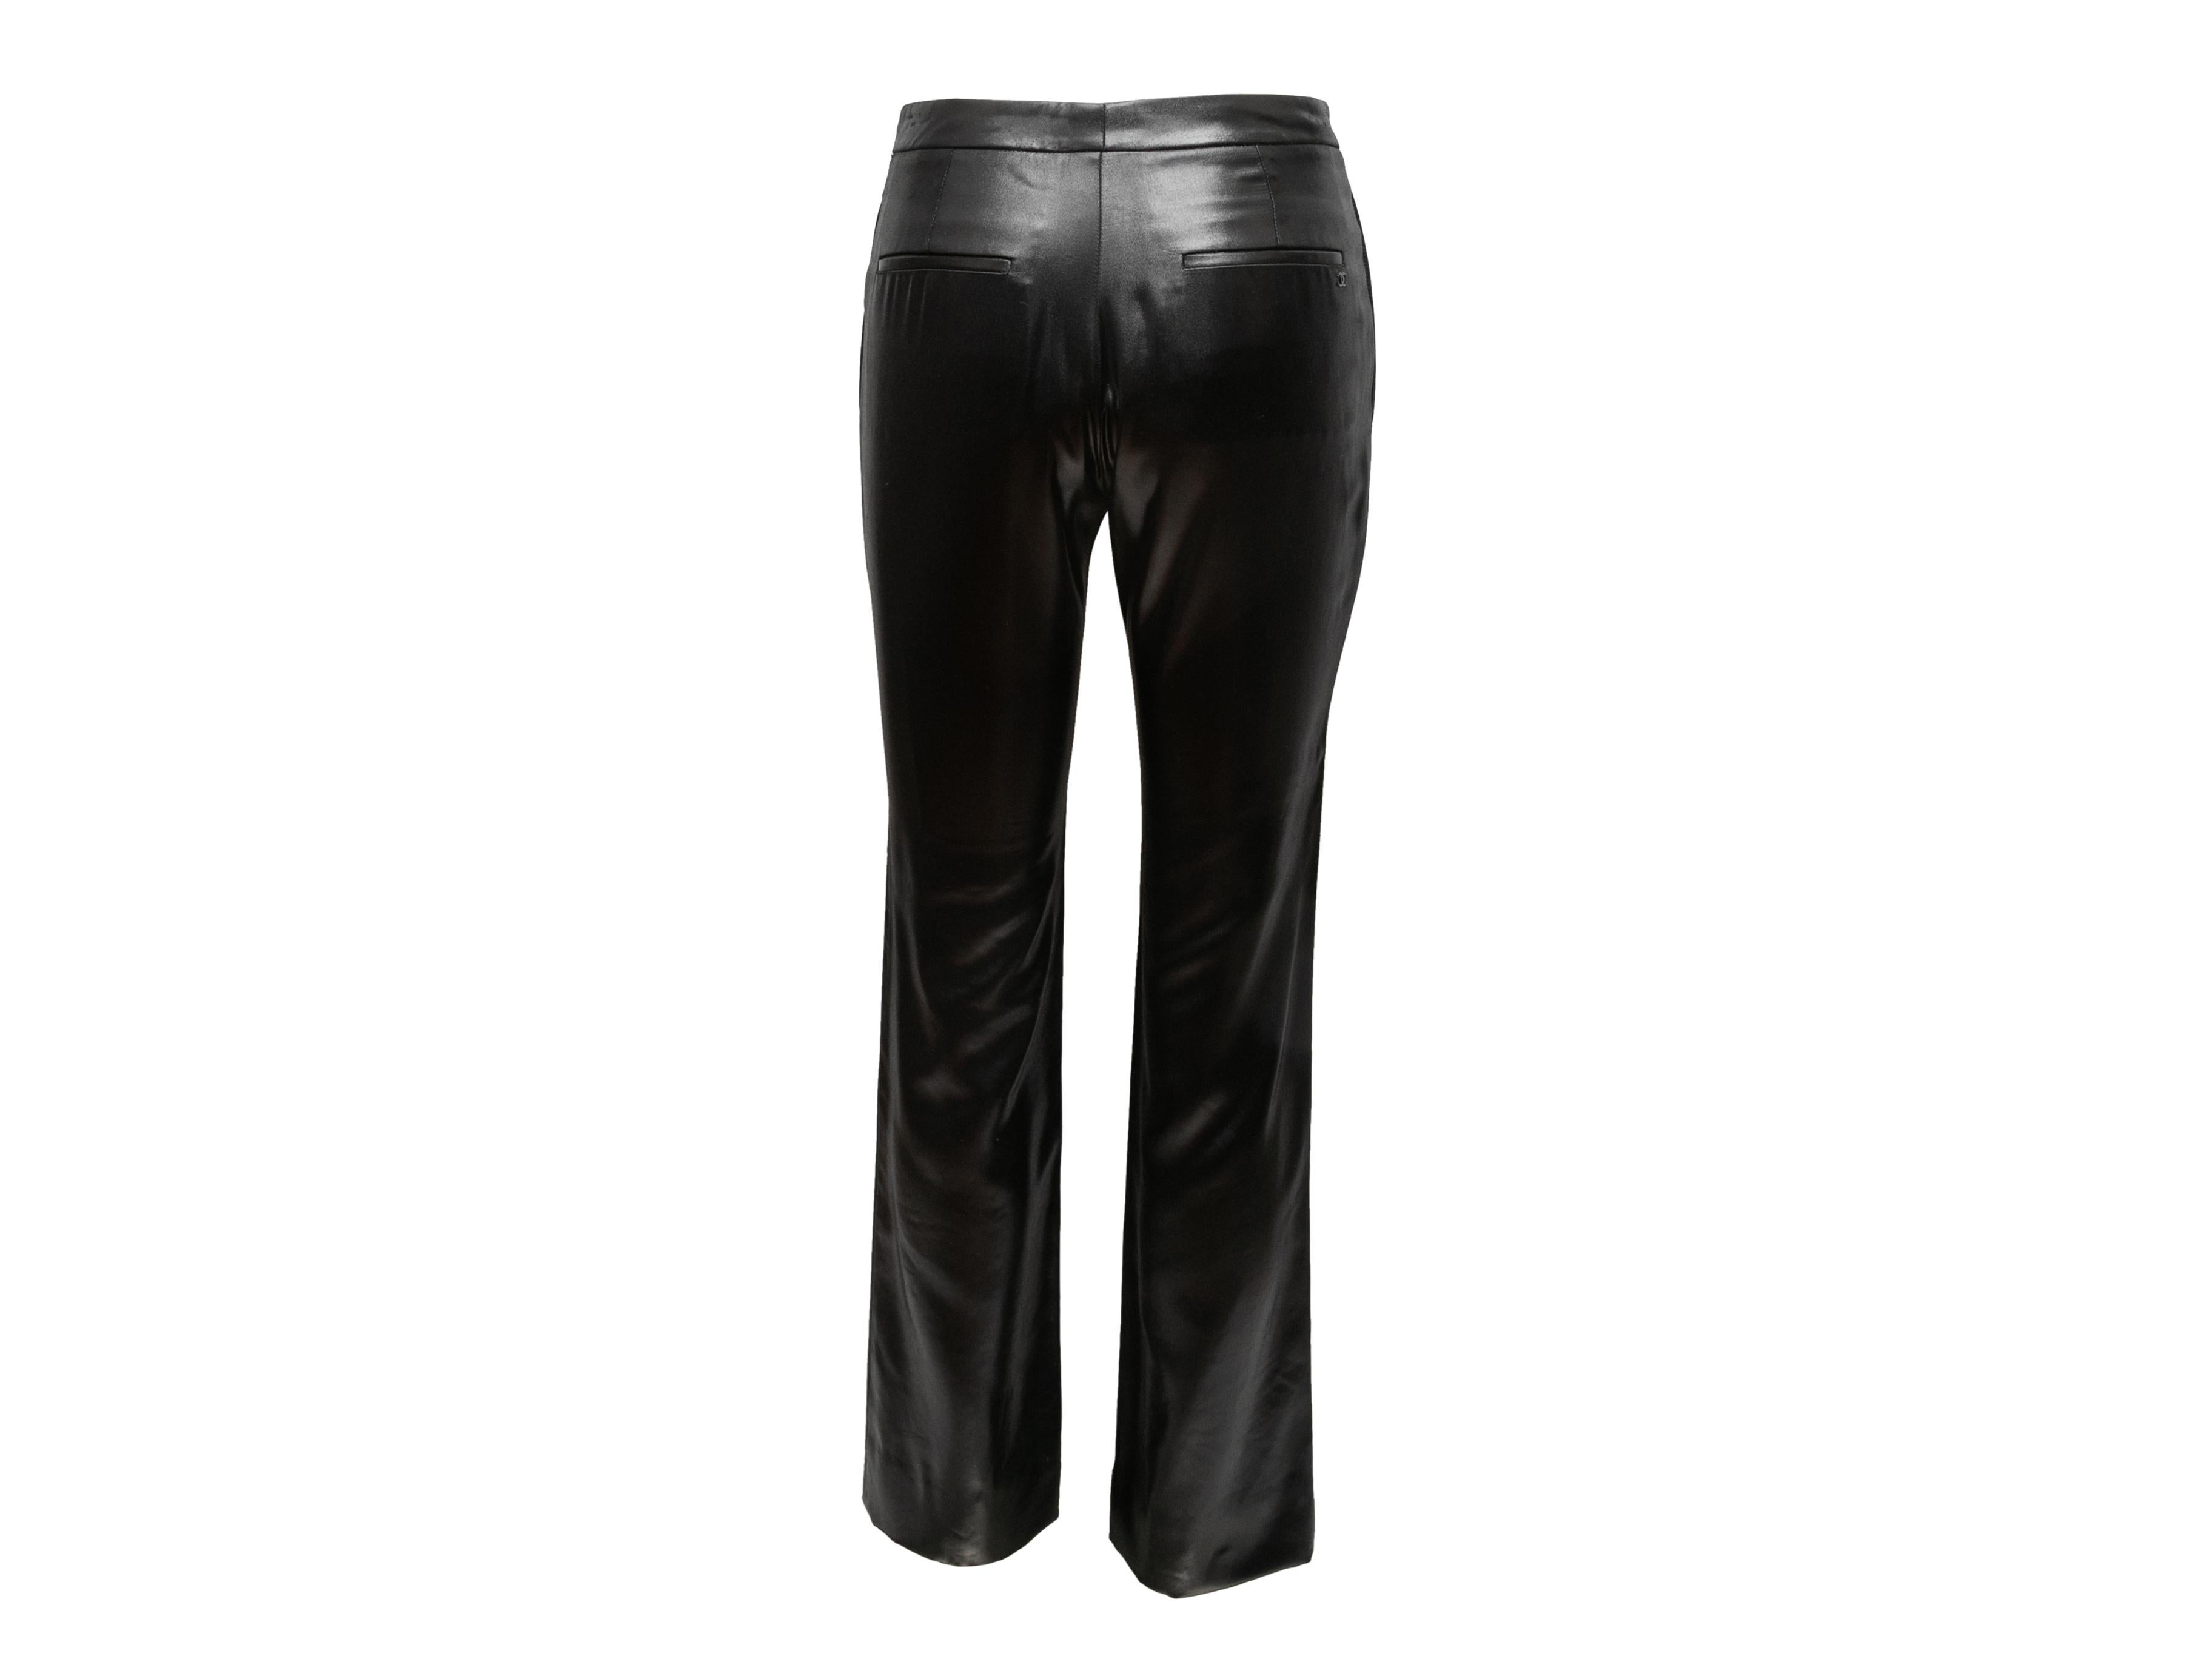 Black shiny straight-leg trousers by Chanel. From the Spring/Summer 2009 Collection. Four pockets. Zip closure at front. 25